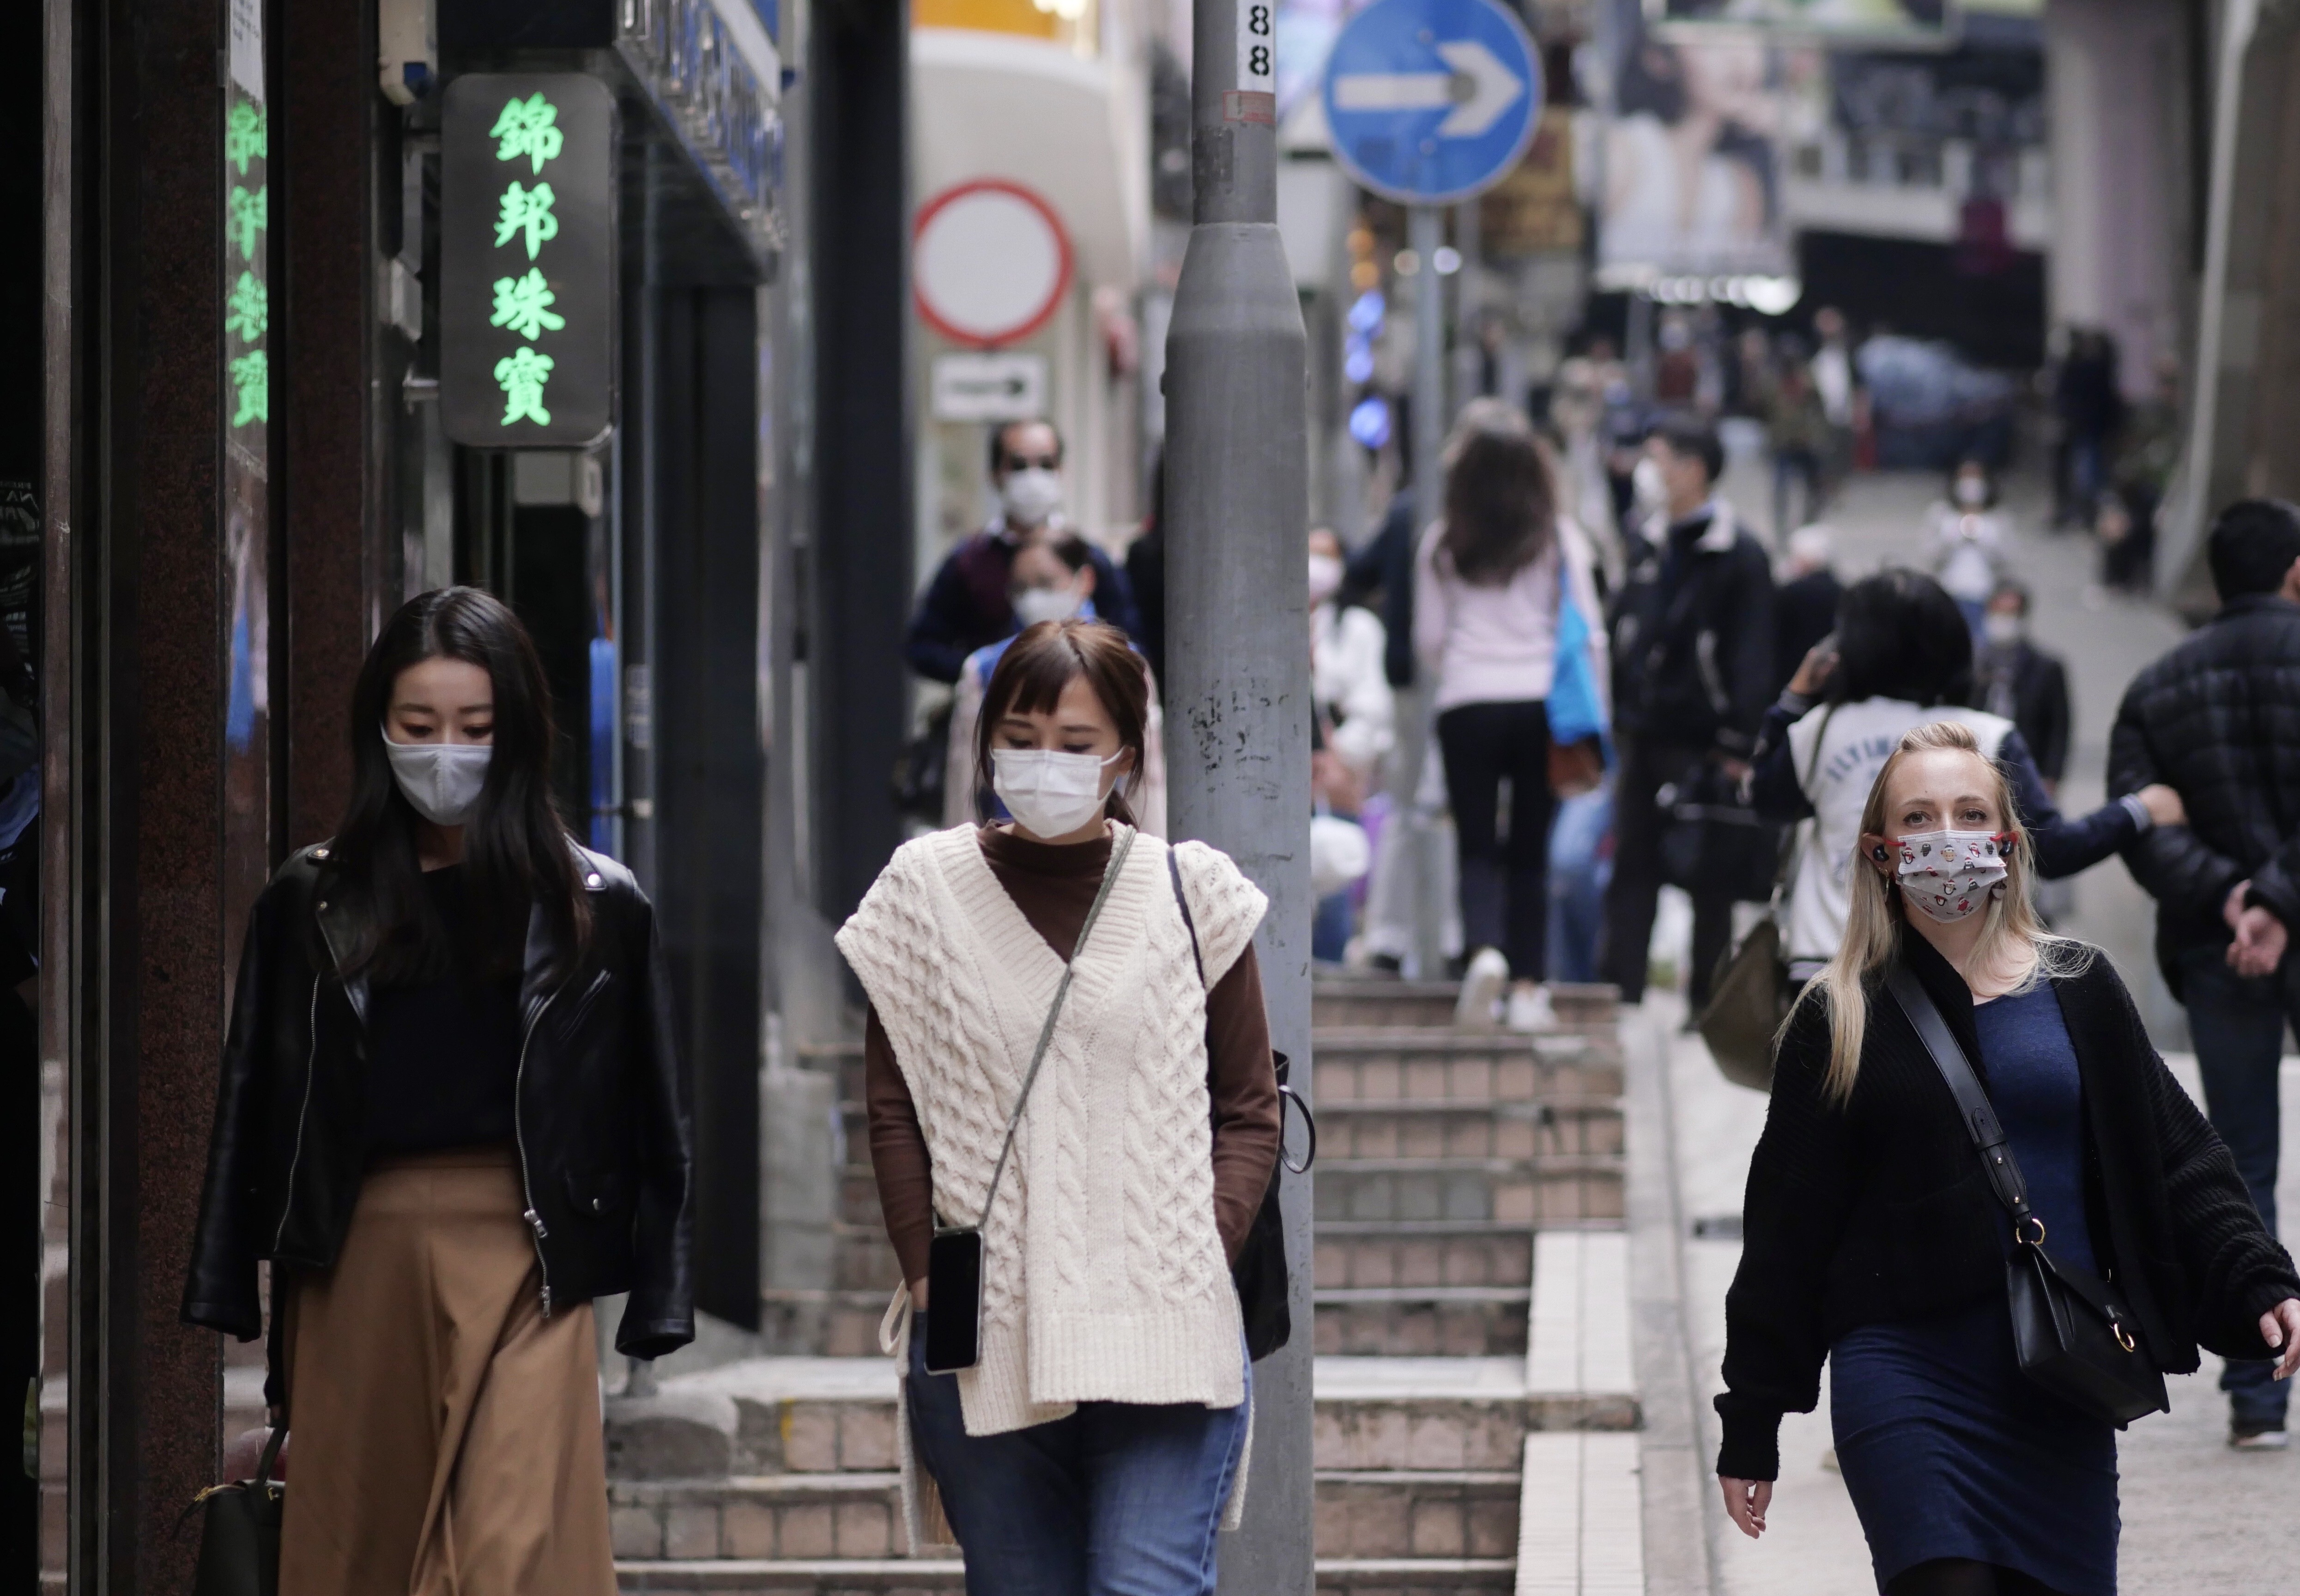 Hong Kong has seen a downward trend in Covid-19 infections, but strict control measures are still in place. Photo: Xinhua